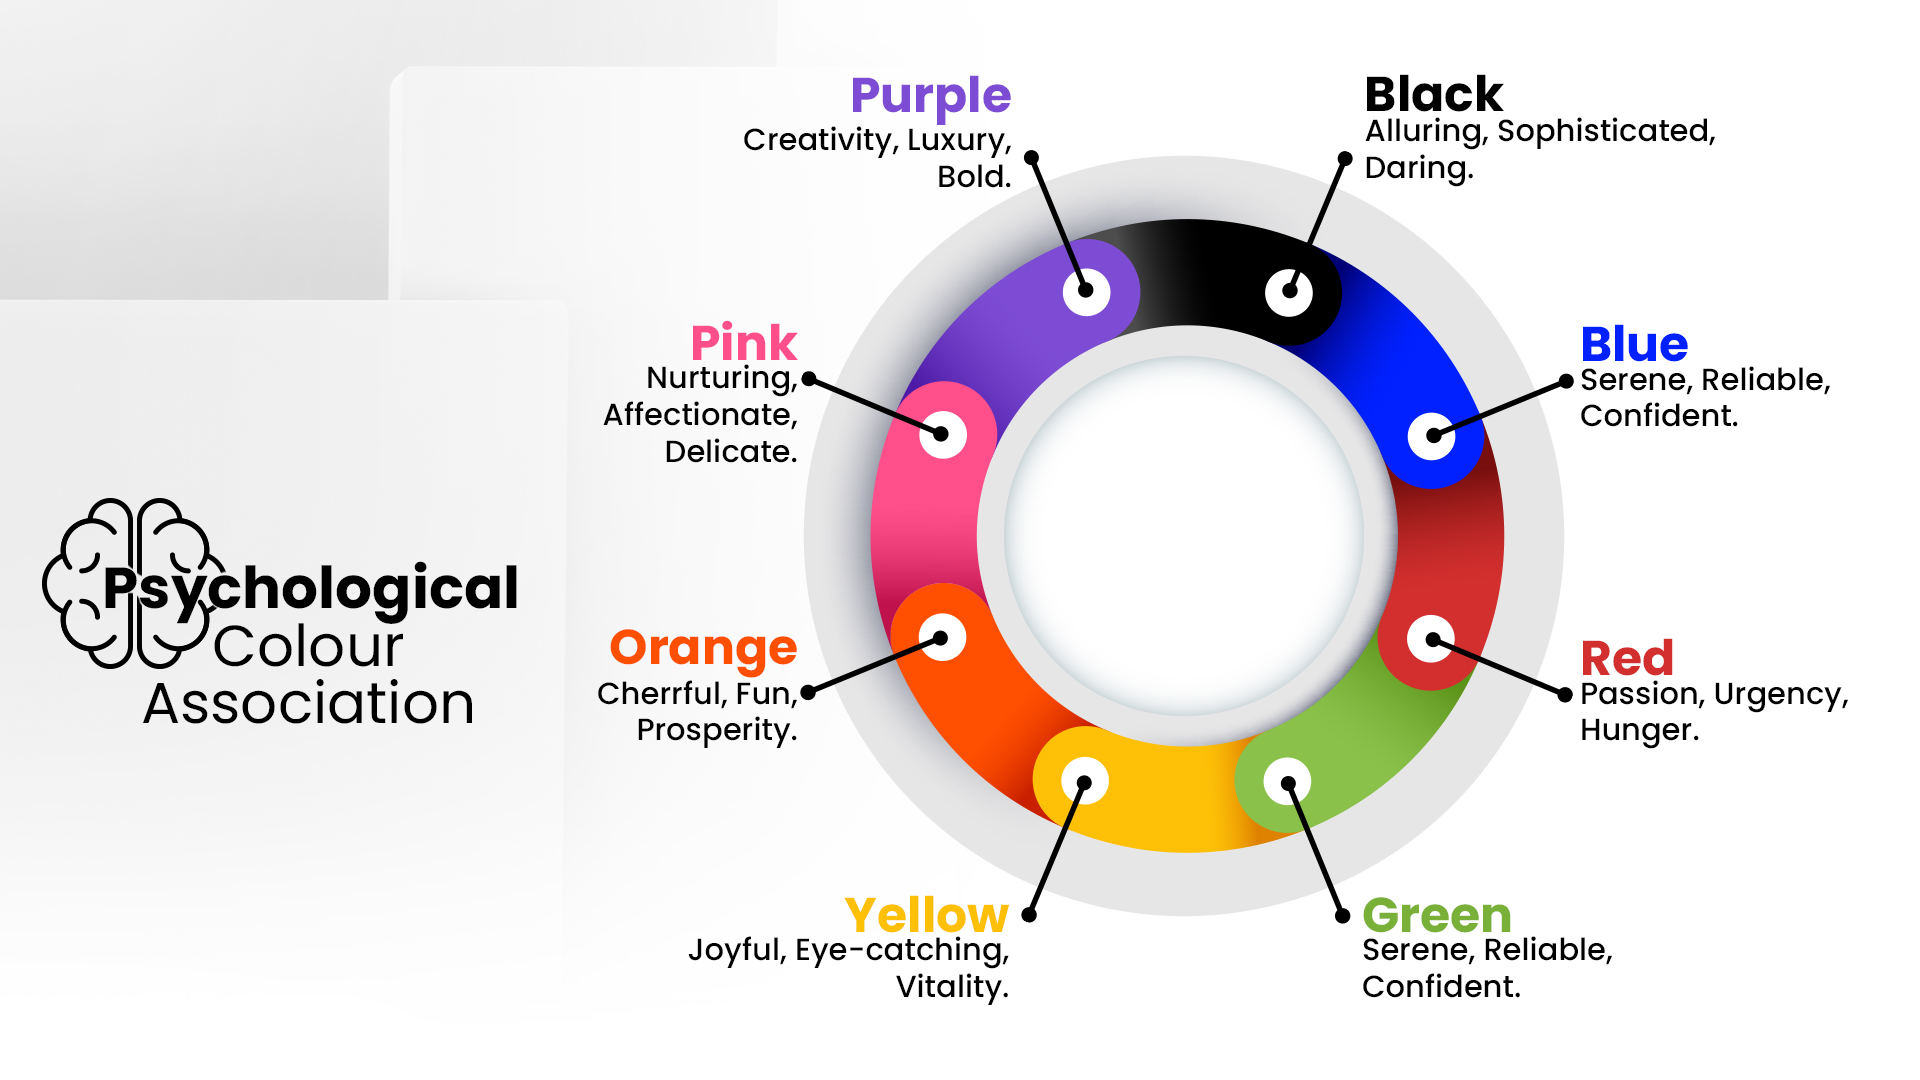 a diagram of colors and text